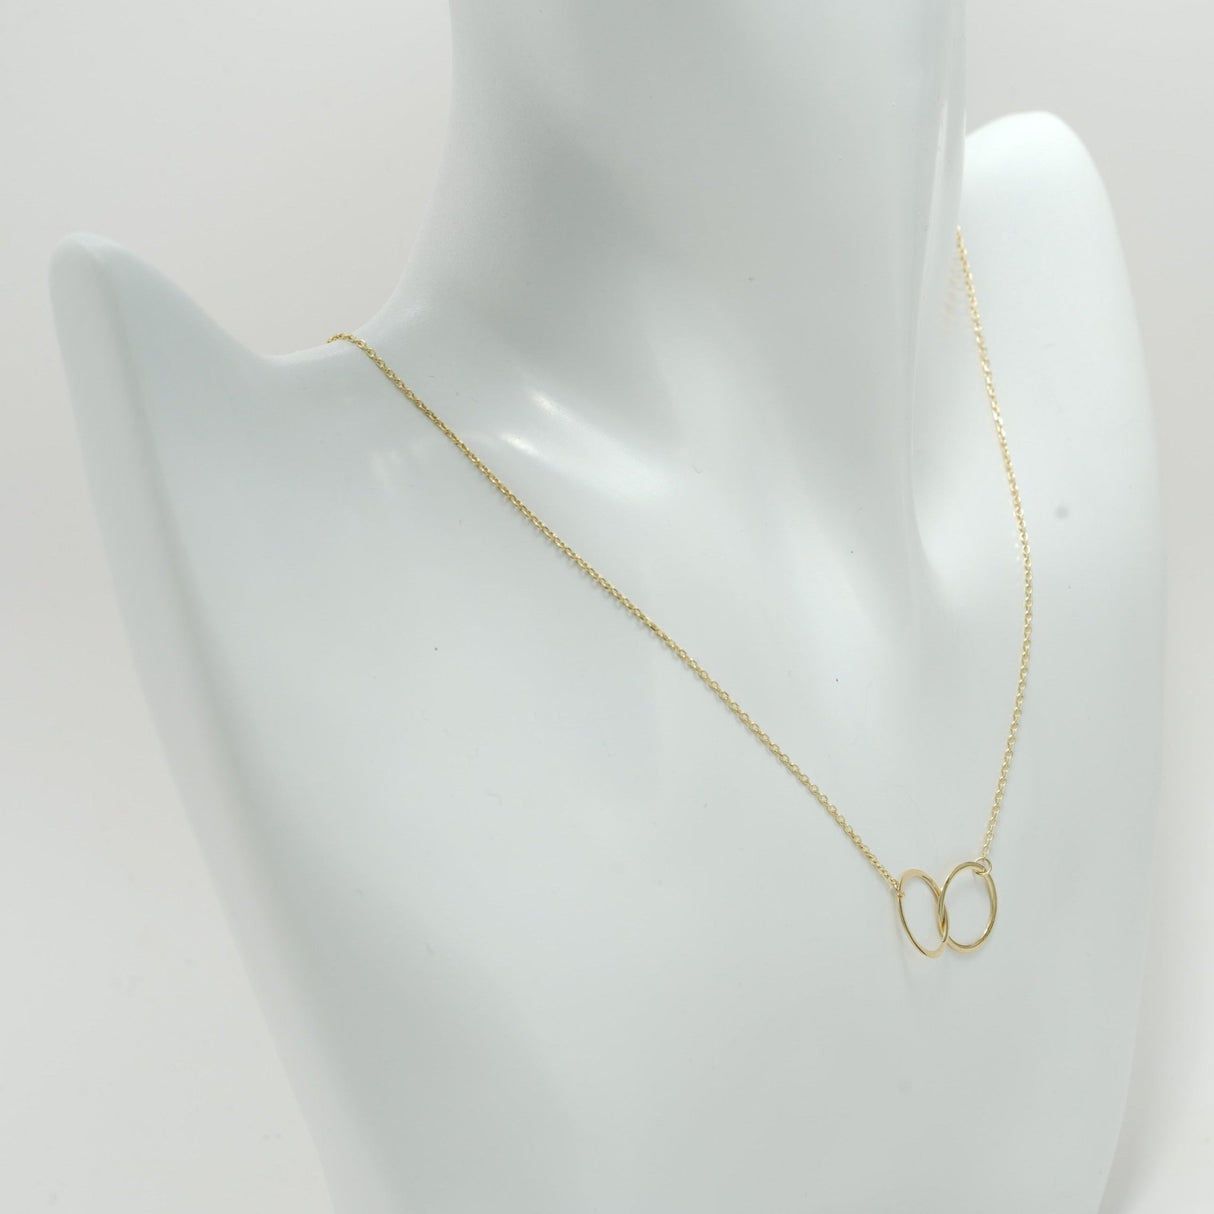 14K Solid Yellow Gold Cable Link Chain / Necklace Thin Dainty Necklace,  Layered Stackable necklace, Minimalist Look, Everyday Gold Chain